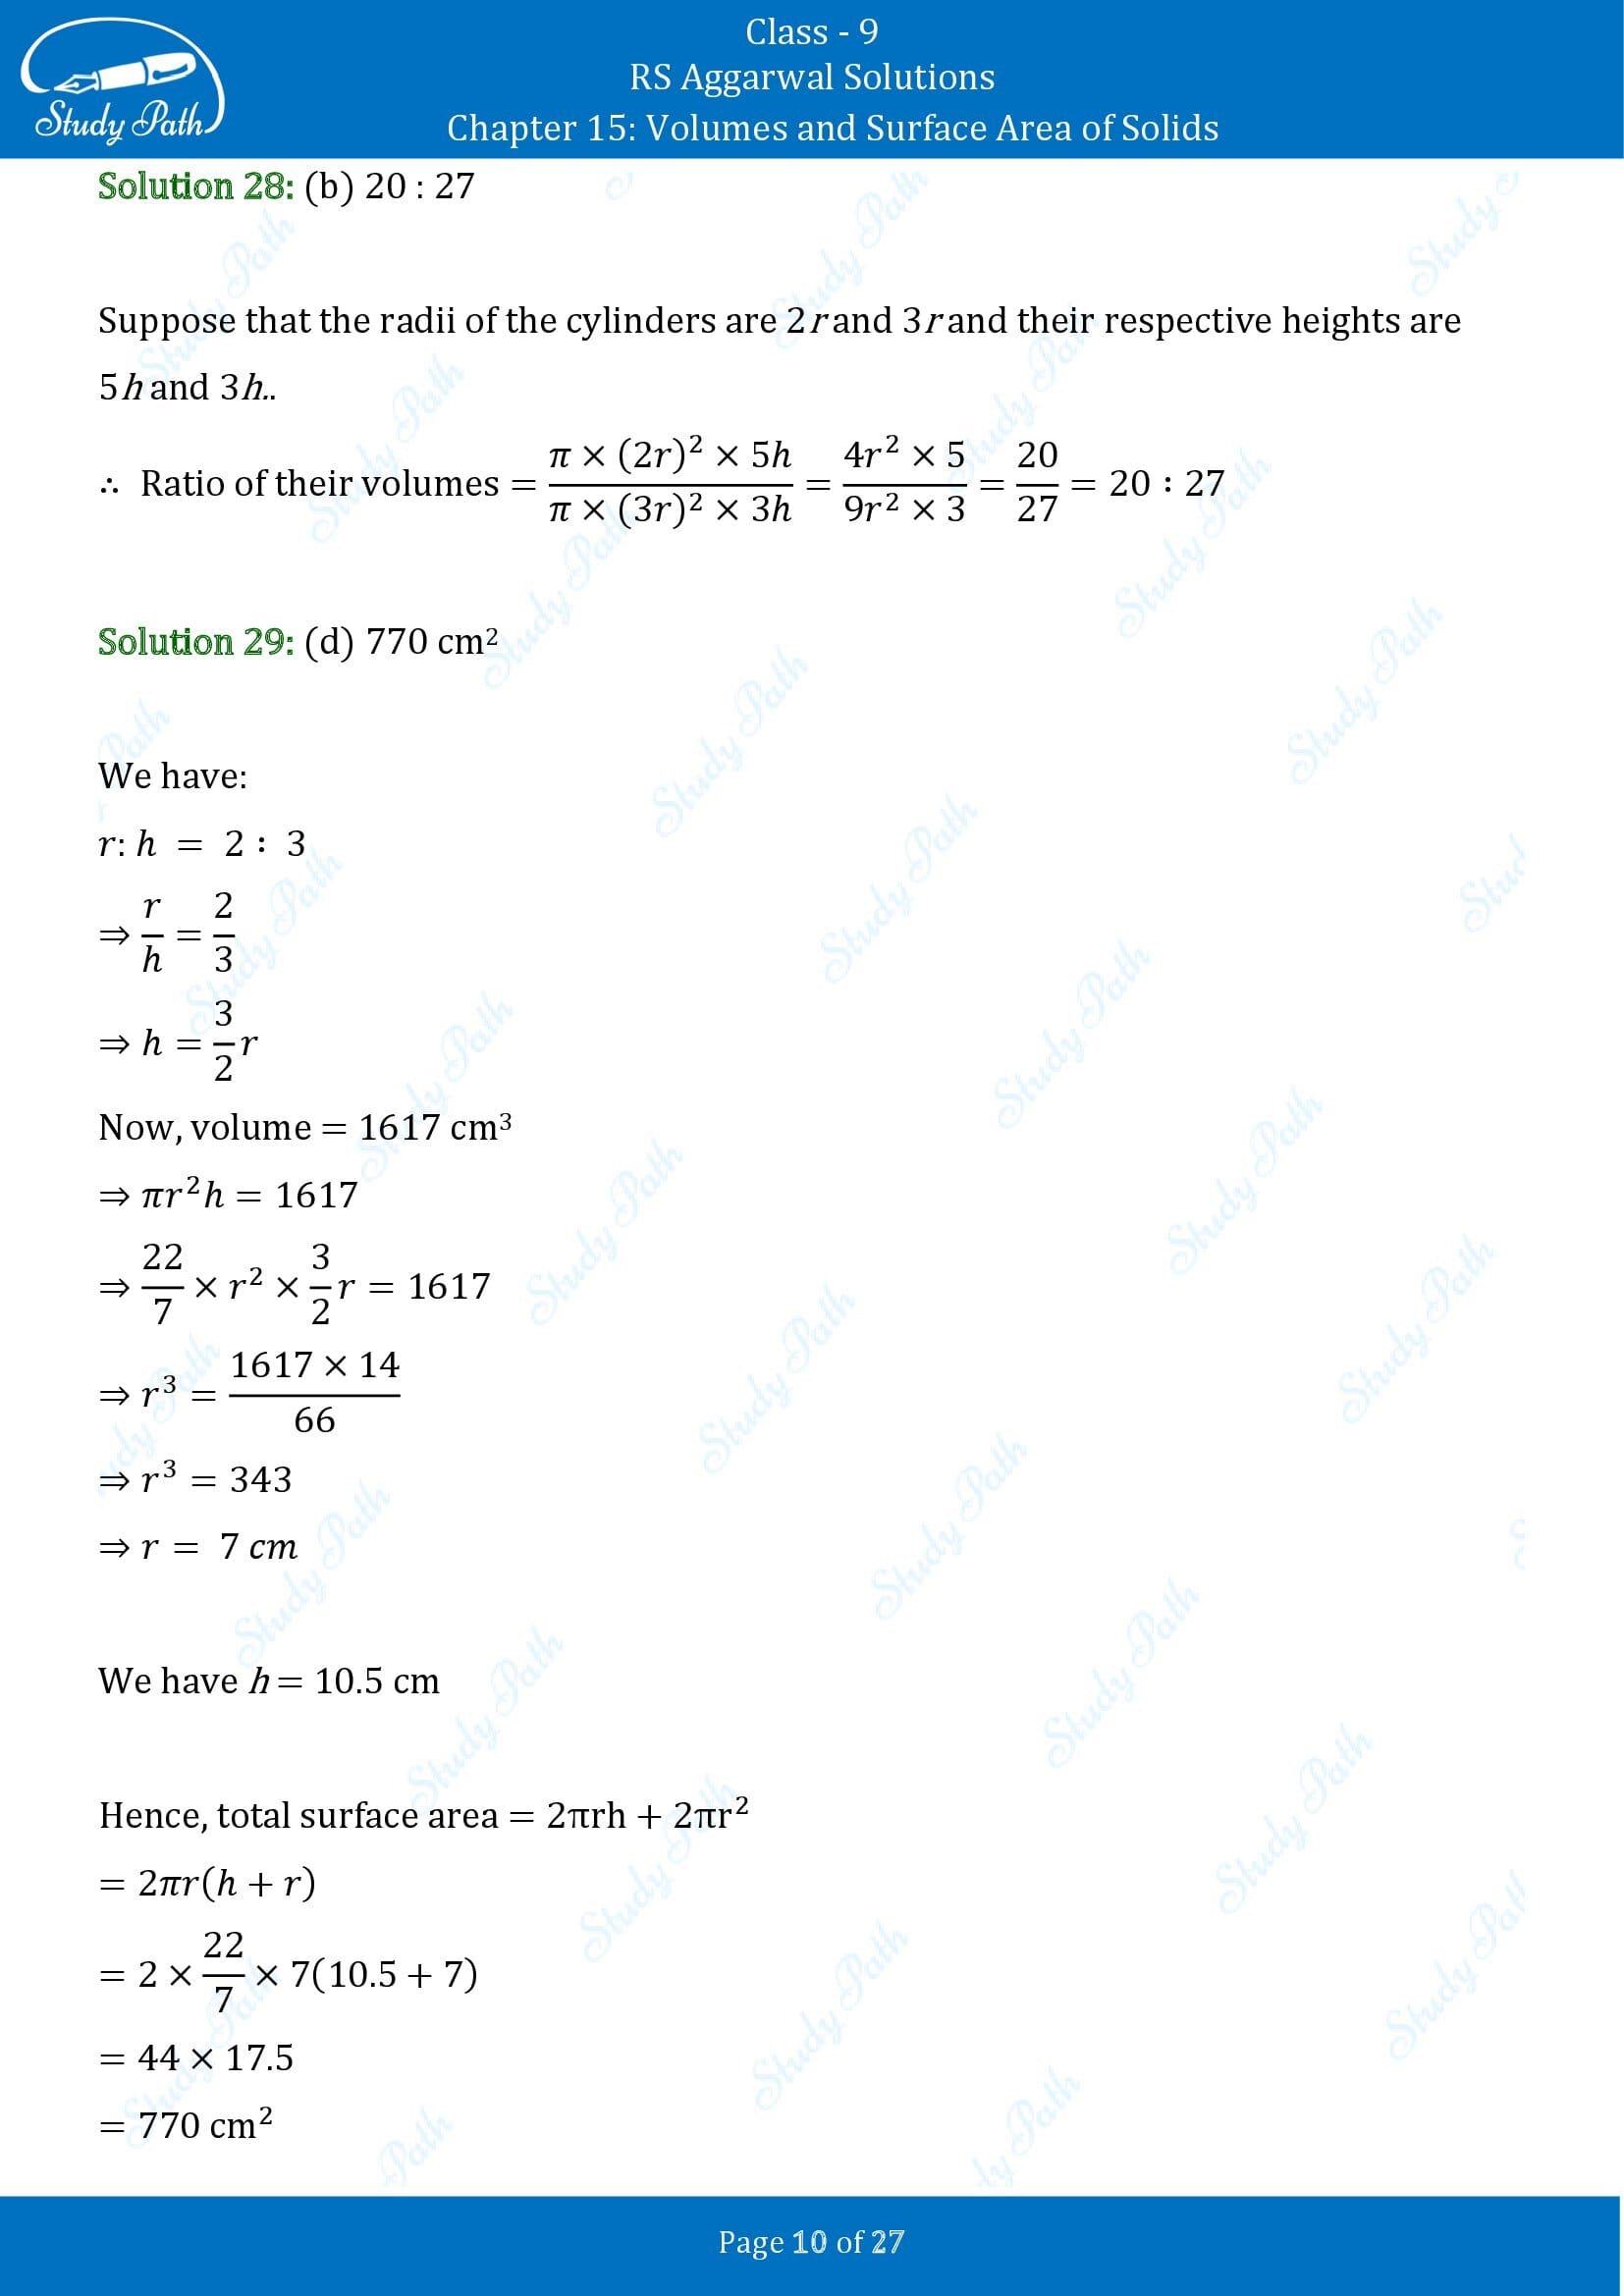 RS Aggarwal Solutions Class 9 Chapter 15 Volumes and Surface Area of Solids Multiple Choice Questions MCQs 00010